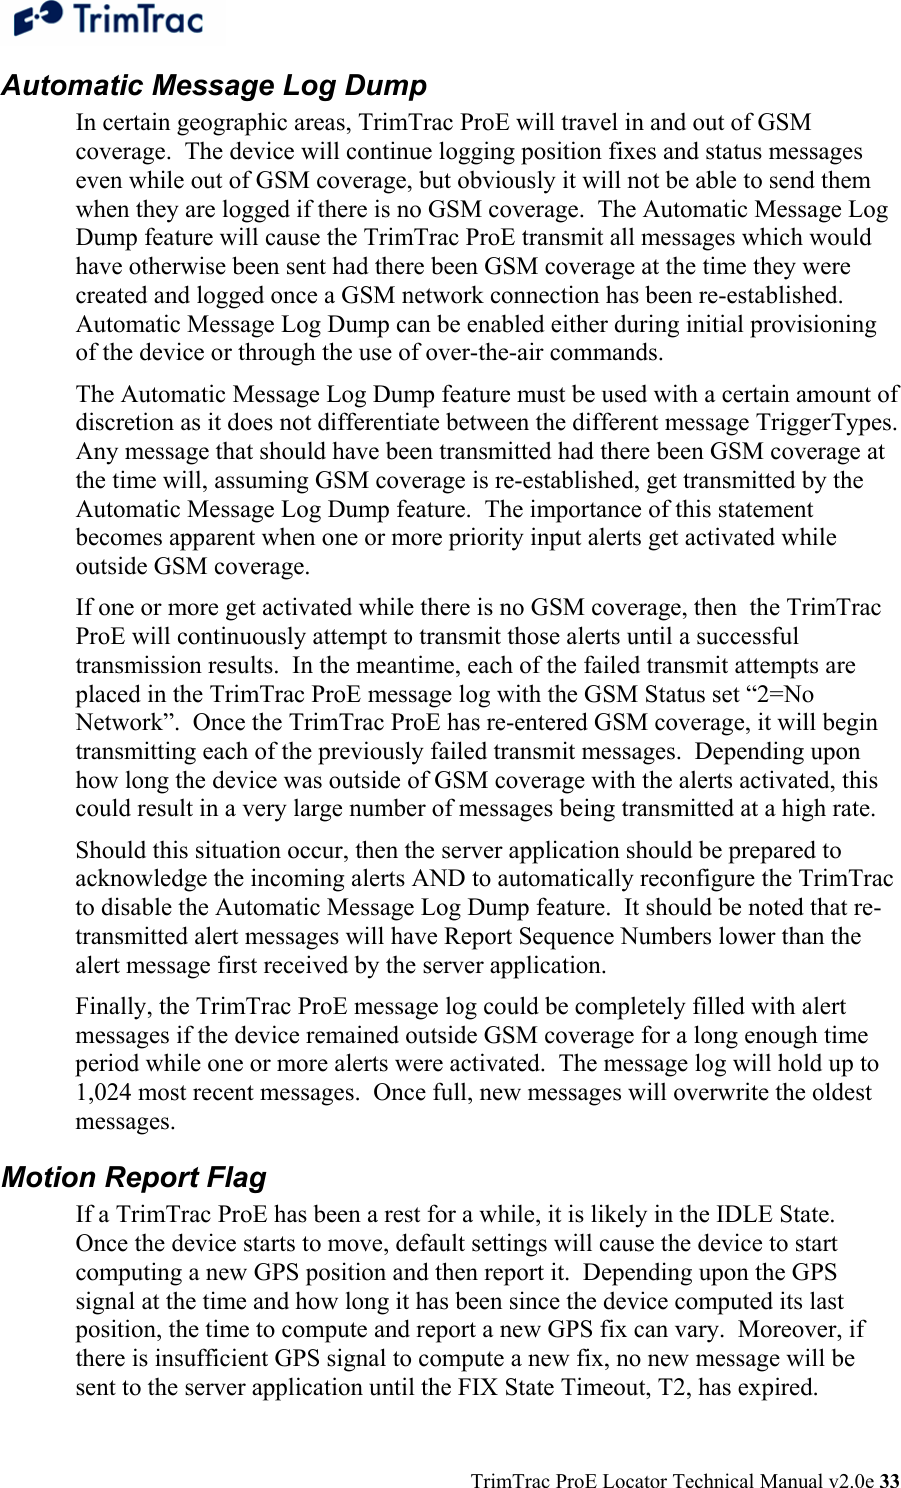  TrimTrac ProE Locator Technical Manual v2.0e 33 Automatic Message Log Dump In certain geographic areas, TrimTrac ProE will travel in and out of GSM coverage.  The device will continue logging position fixes and status messages even while out of GSM coverage, but obviously it will not be able to send them when they are logged if there is no GSM coverage.  The Automatic Message Log Dump feature will cause the TrimTrac ProE transmit all messages which would have otherwise been sent had there been GSM coverage at the time they were created and logged once a GSM network connection has been re-established.  Automatic Message Log Dump can be enabled either during initial provisioning of the device or through the use of over-the-air commands.  The Automatic Message Log Dump feature must be used with a certain amount of discretion as it does not differentiate between the different message TriggerTypes.  Any message that should have been transmitted had there been GSM coverage at the time will, assuming GSM coverage is re-established, get transmitted by the Automatic Message Log Dump feature.  The importance of this statement becomes apparent when one or more priority input alerts get activated while outside GSM coverage.  If one or more get activated while there is no GSM coverage, then  the TrimTrac ProE will continuously attempt to transmit those alerts until a successful transmission results.  In the meantime, each of the failed transmit attempts are placed in the TrimTrac ProE message log with the GSM Status set “2=No Network”.  Once the TrimTrac ProE has re-entered GSM coverage, it will begin transmitting each of the previously failed transmit messages.  Depending upon how long the device was outside of GSM coverage with the alerts activated, this could result in a very large number of messages being transmitted at a high rate.  Should this situation occur, then the server application should be prepared to acknowledge the incoming alerts AND to automatically reconfigure the TrimTrac to disable the Automatic Message Log Dump feature.  It should be noted that re-transmitted alert messages will have Report Sequence Numbers lower than the alert message first received by the server application.   Finally, the TrimTrac ProE message log could be completely filled with alert messages if the device remained outside GSM coverage for a long enough time period while one or more alerts were activated.  The message log will hold up to 1,024 most recent messages.  Once full, new messages will overwrite the oldest messages. Motion Report Flag If a TrimTrac ProE has been a rest for a while, it is likely in the IDLE State.  Once the device starts to move, default settings will cause the device to start computing a new GPS position and then report it.  Depending upon the GPS signal at the time and how long it has been since the device computed its last position, the time to compute and report a new GPS fix can vary.  Moreover, if there is insufficient GPS signal to compute a new fix, no new message will be sent to the server application until the FIX State Timeout, T2, has expired.  